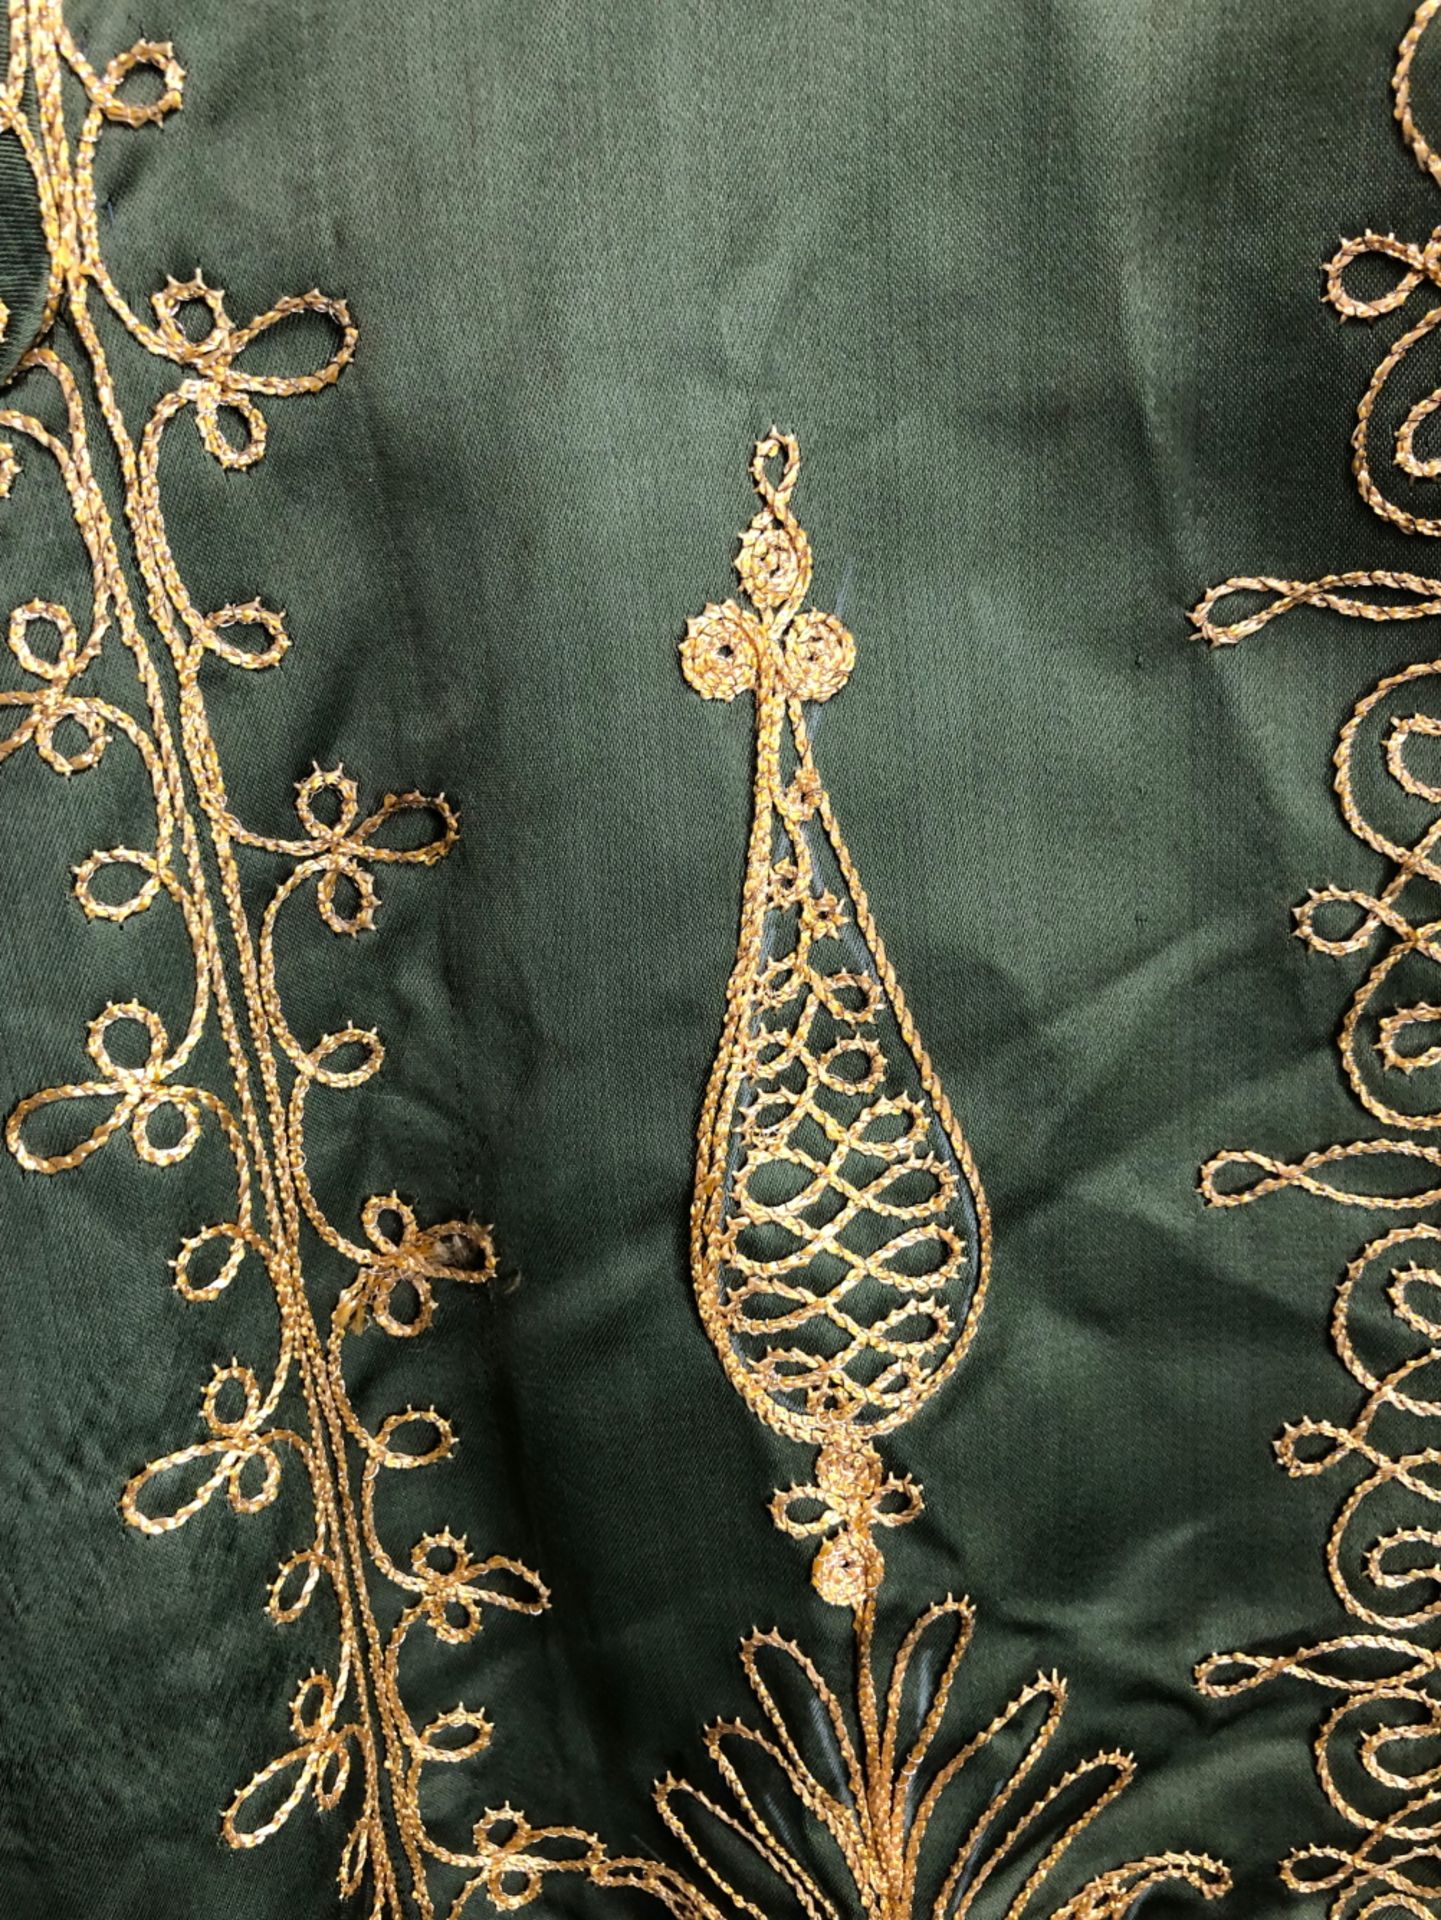 JACKET, AN INDIAN GREEN SILK JACKET EMBROIDERED IN GOLD THREAD, SLEEVE LENGTH 48cms, NECK TO HEM - Image 4 of 10